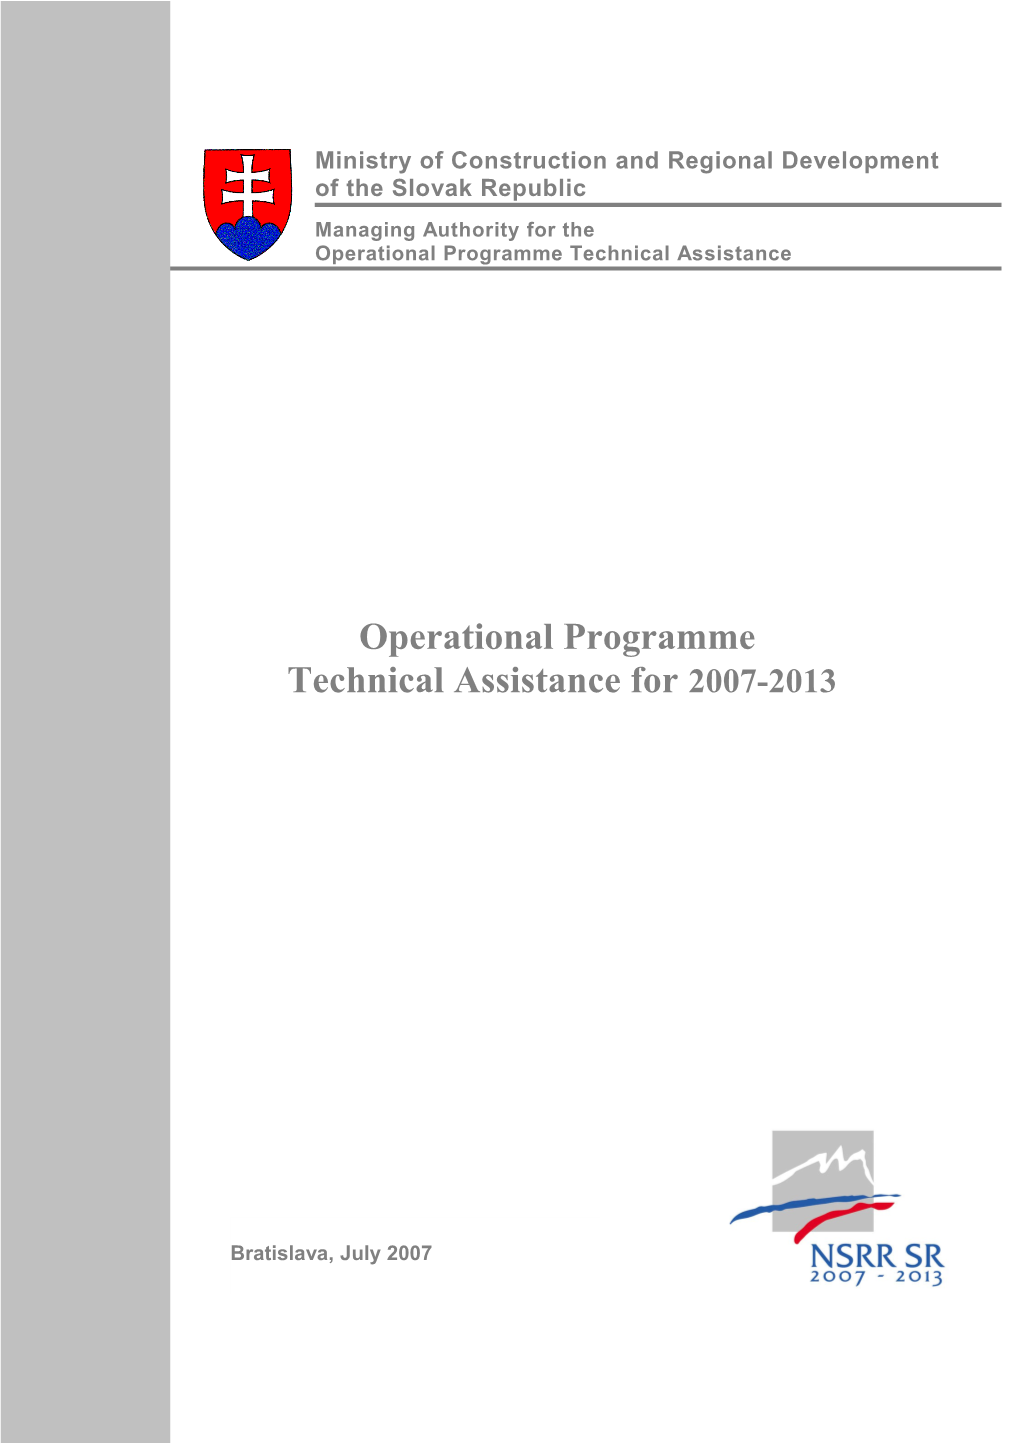 Operational Programme Technical Assistance 4